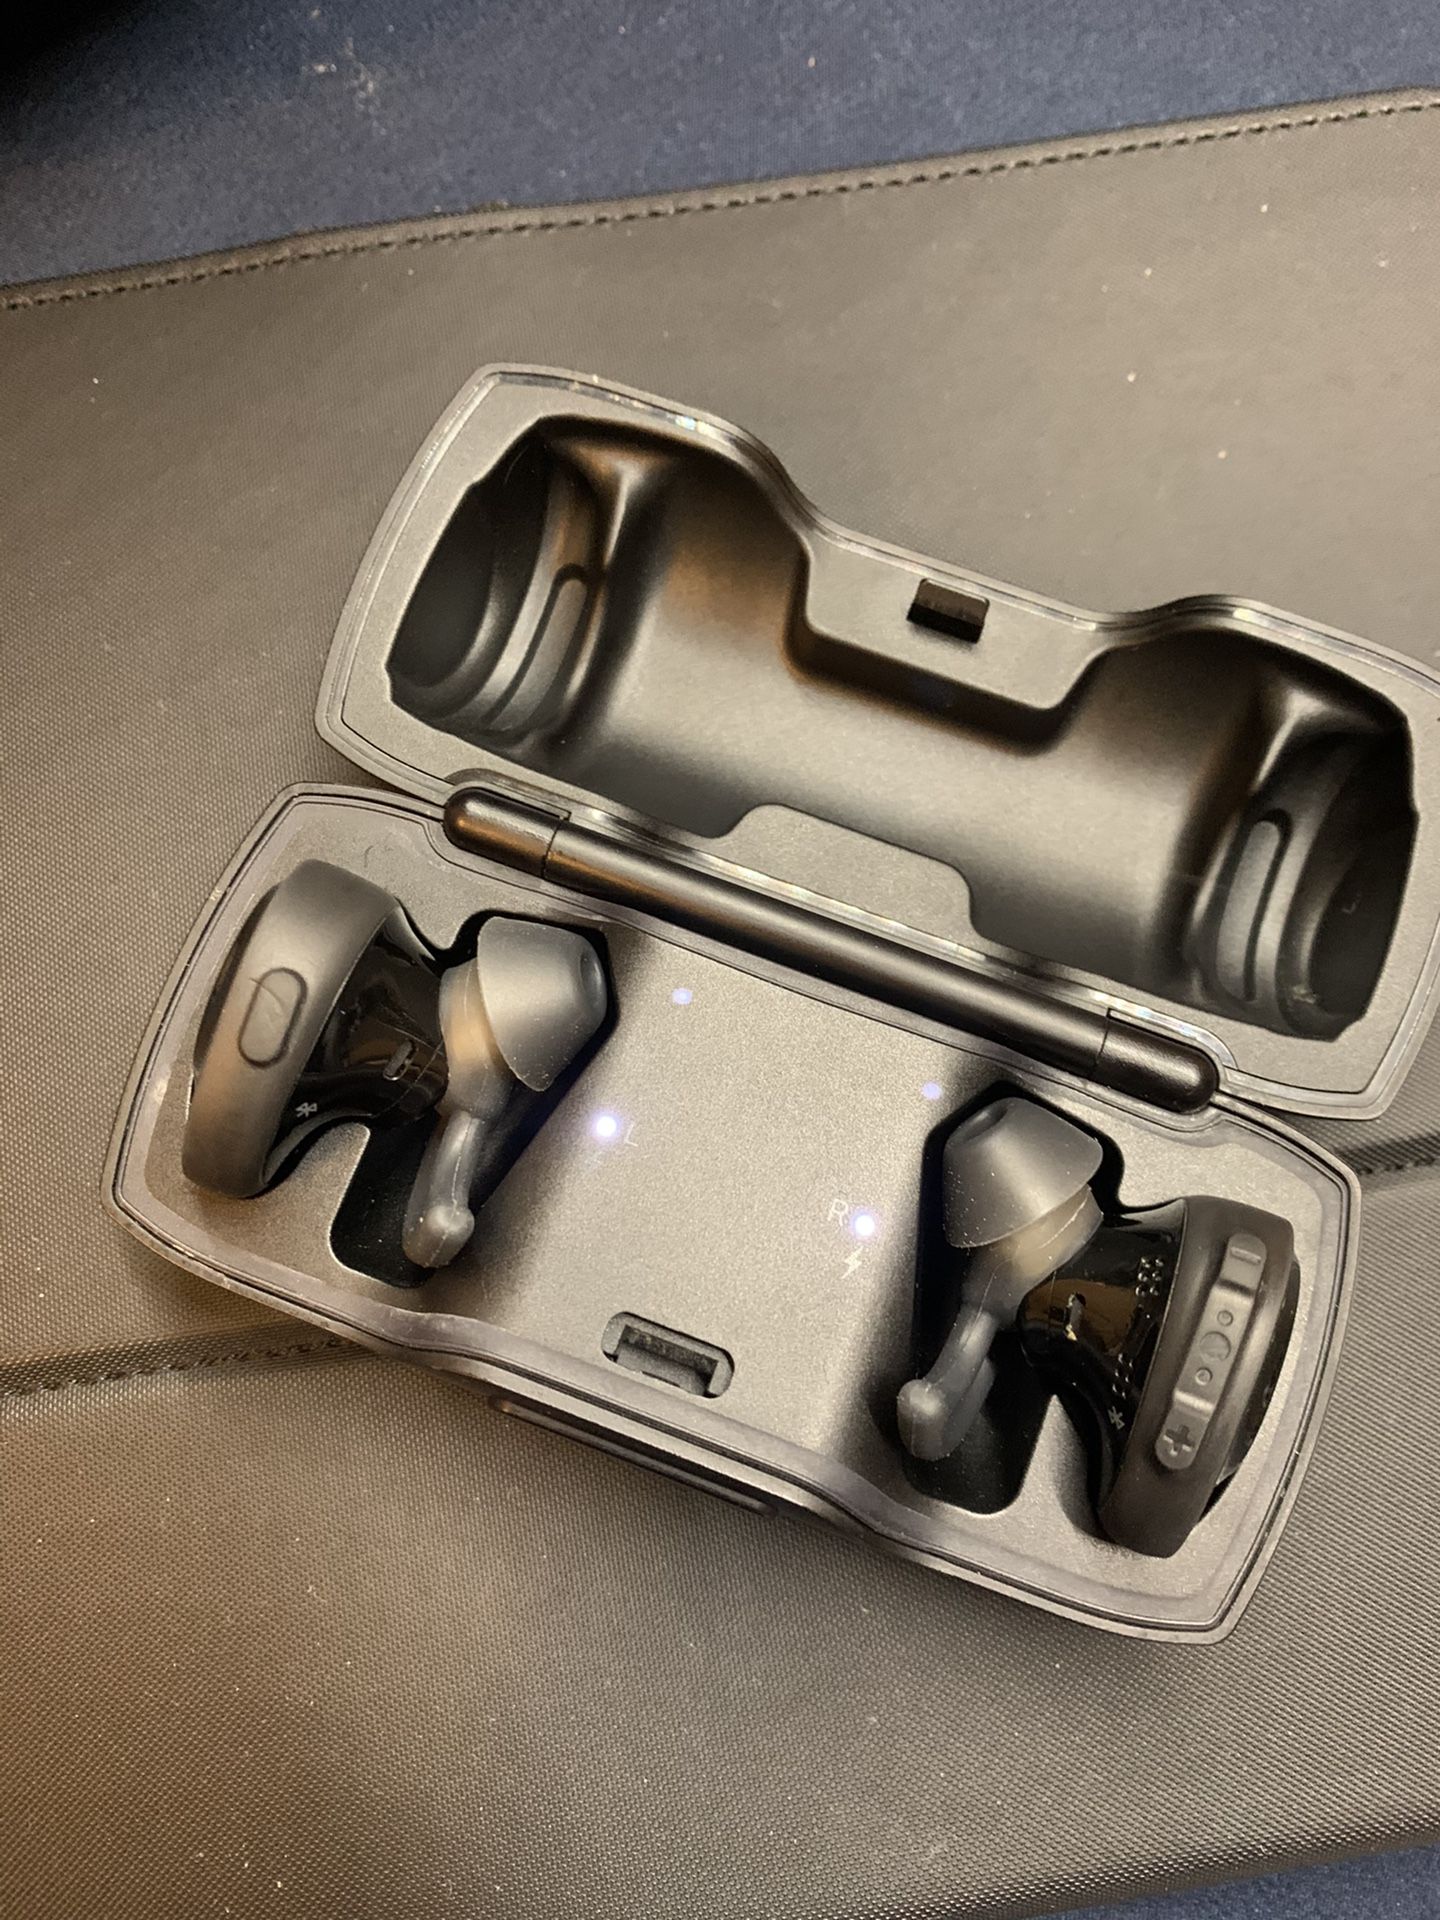 Bose Sound Sport True Wireless Earbuds (Includes Charger Case) $85 Cash Only No Trades